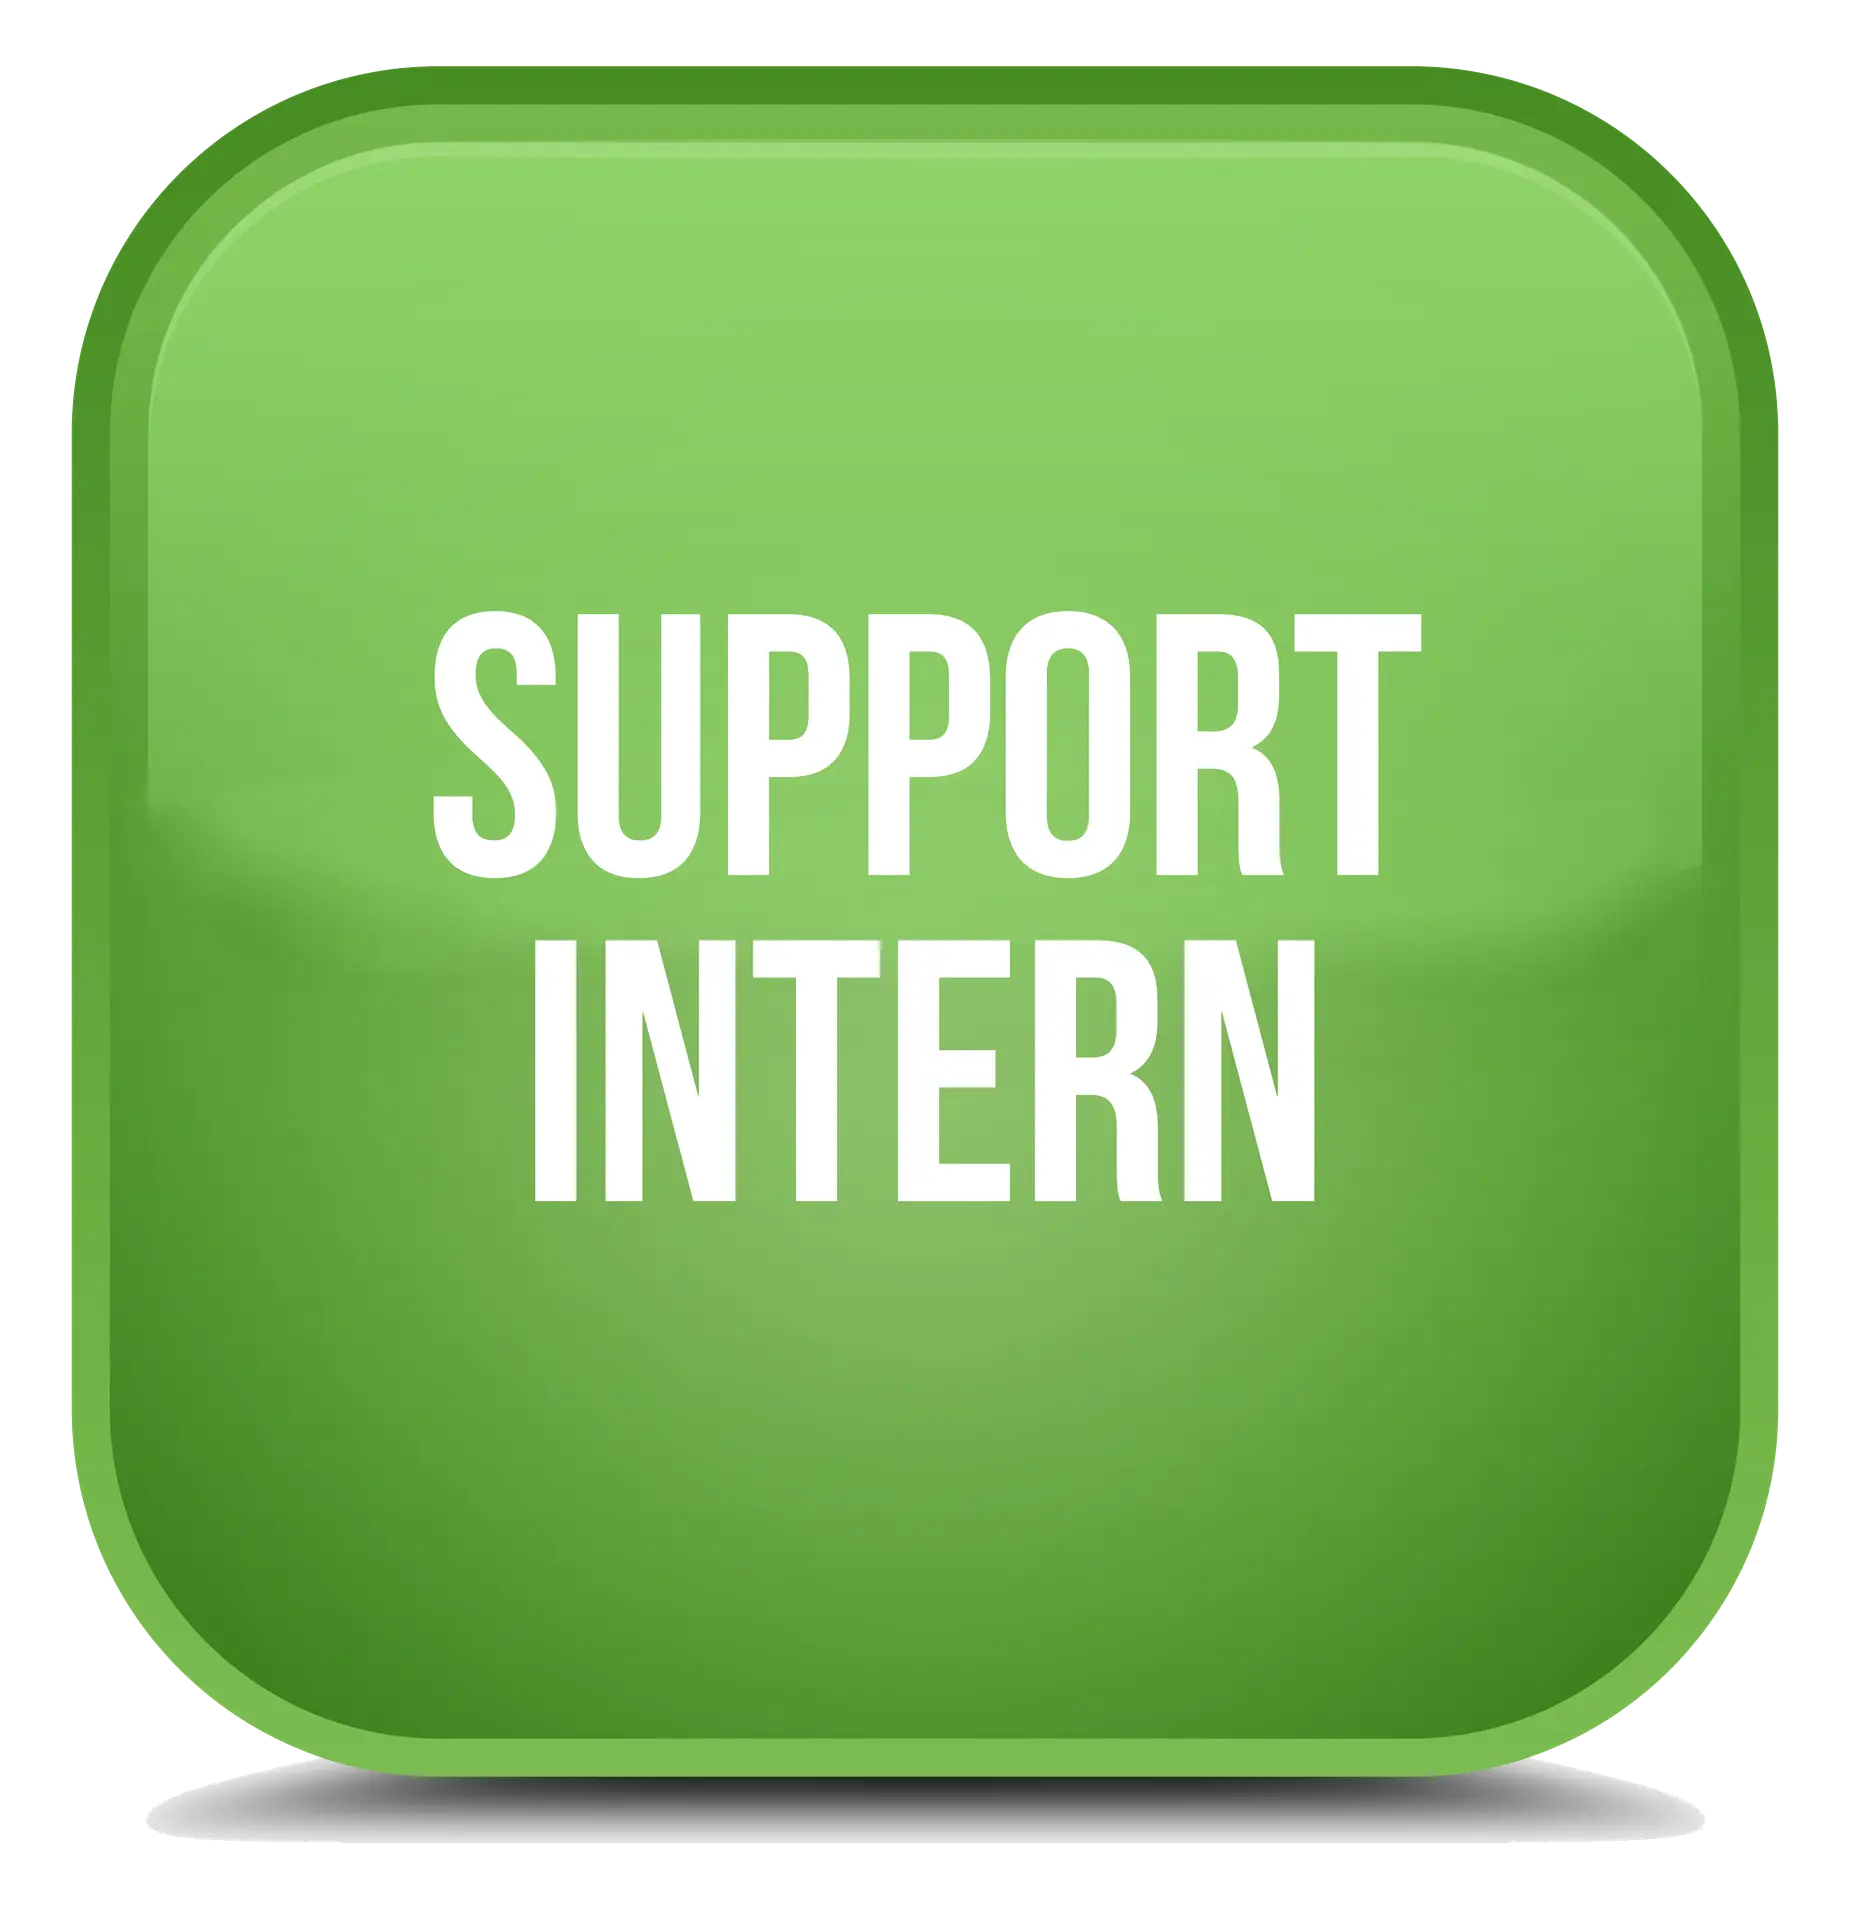 Green button for IT Support Intern position.